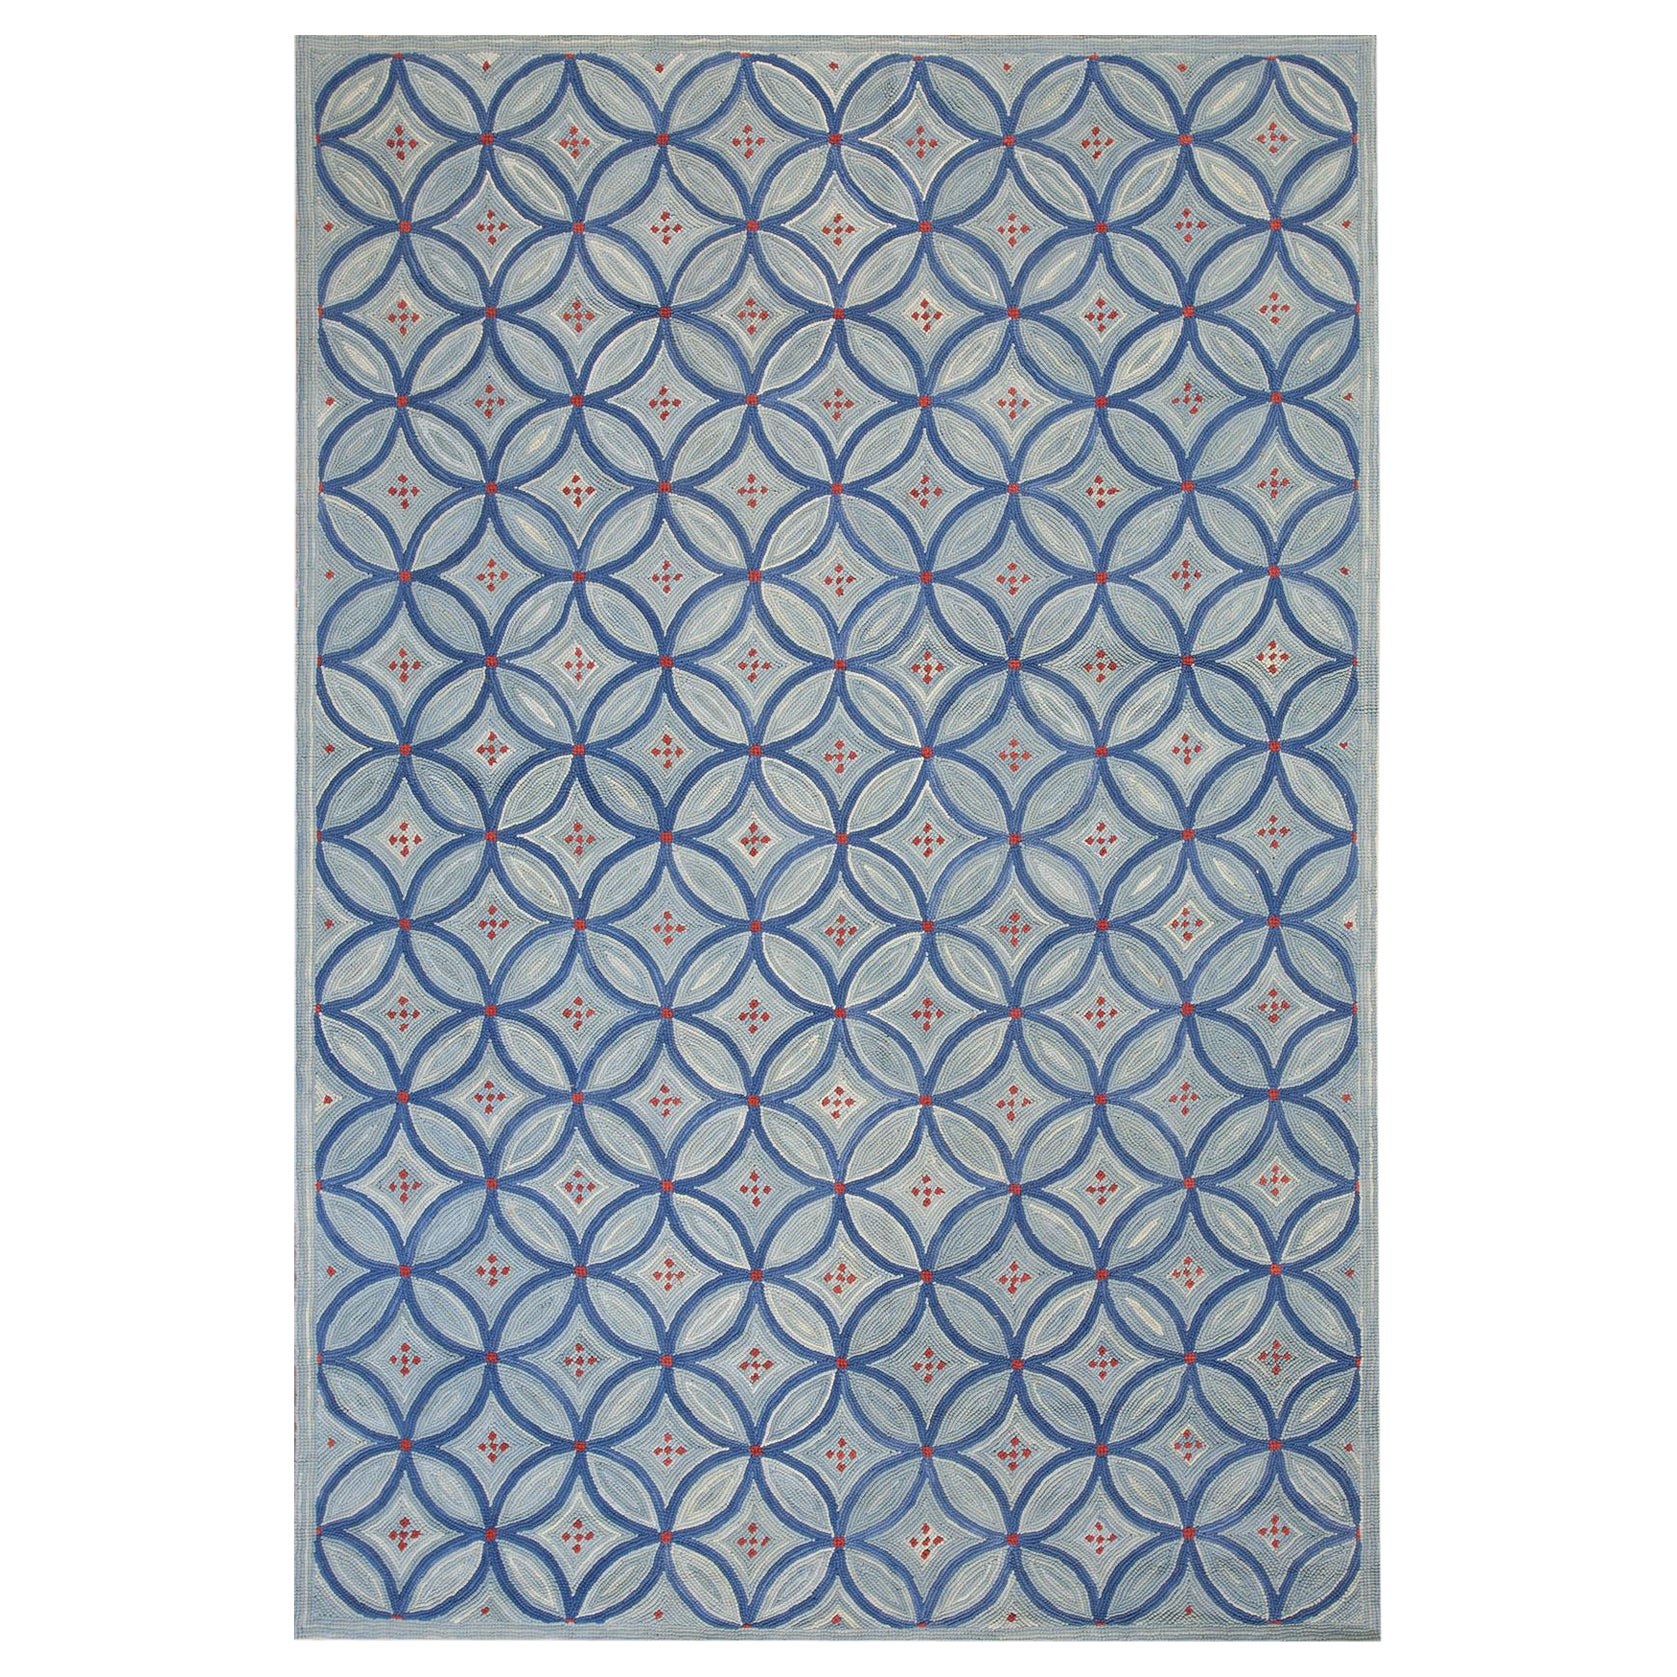 Contemporary Handmade Hooked Rug ( 6' x9' - 183 x 274 cm ) For Sale